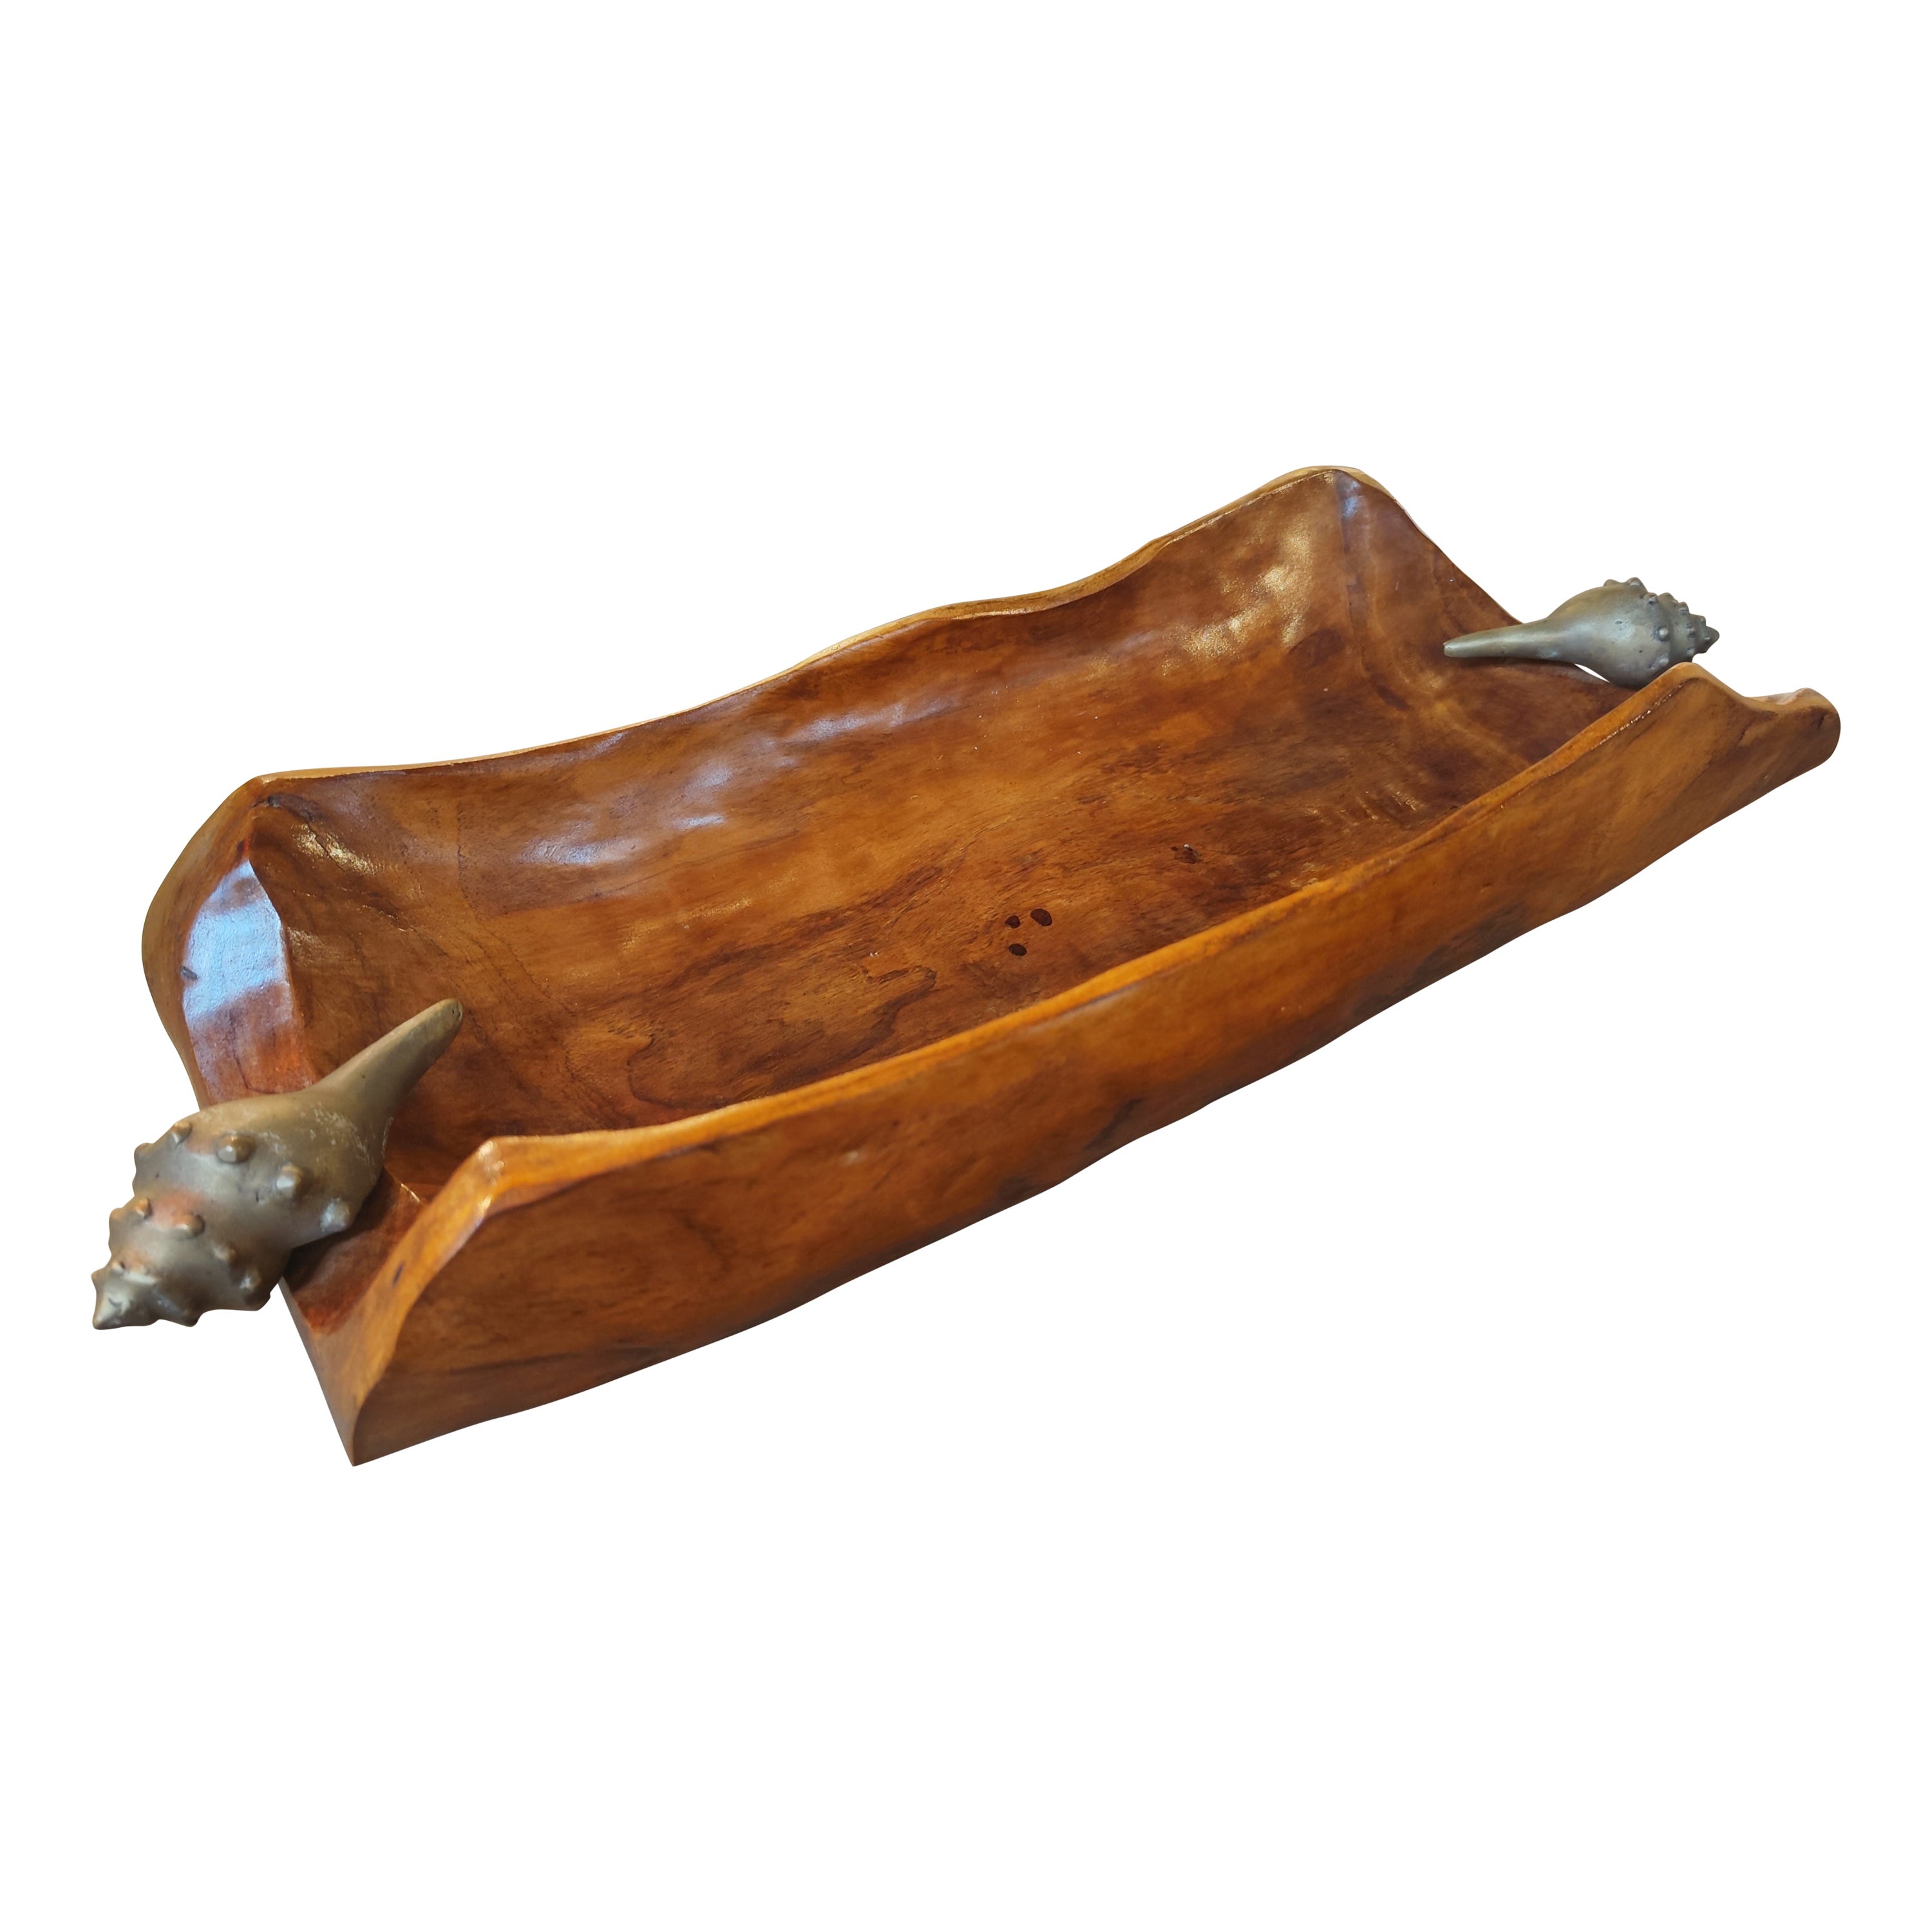 Varnished Wooden Fruit Bowl with Bronze Conch-shaped Handles 